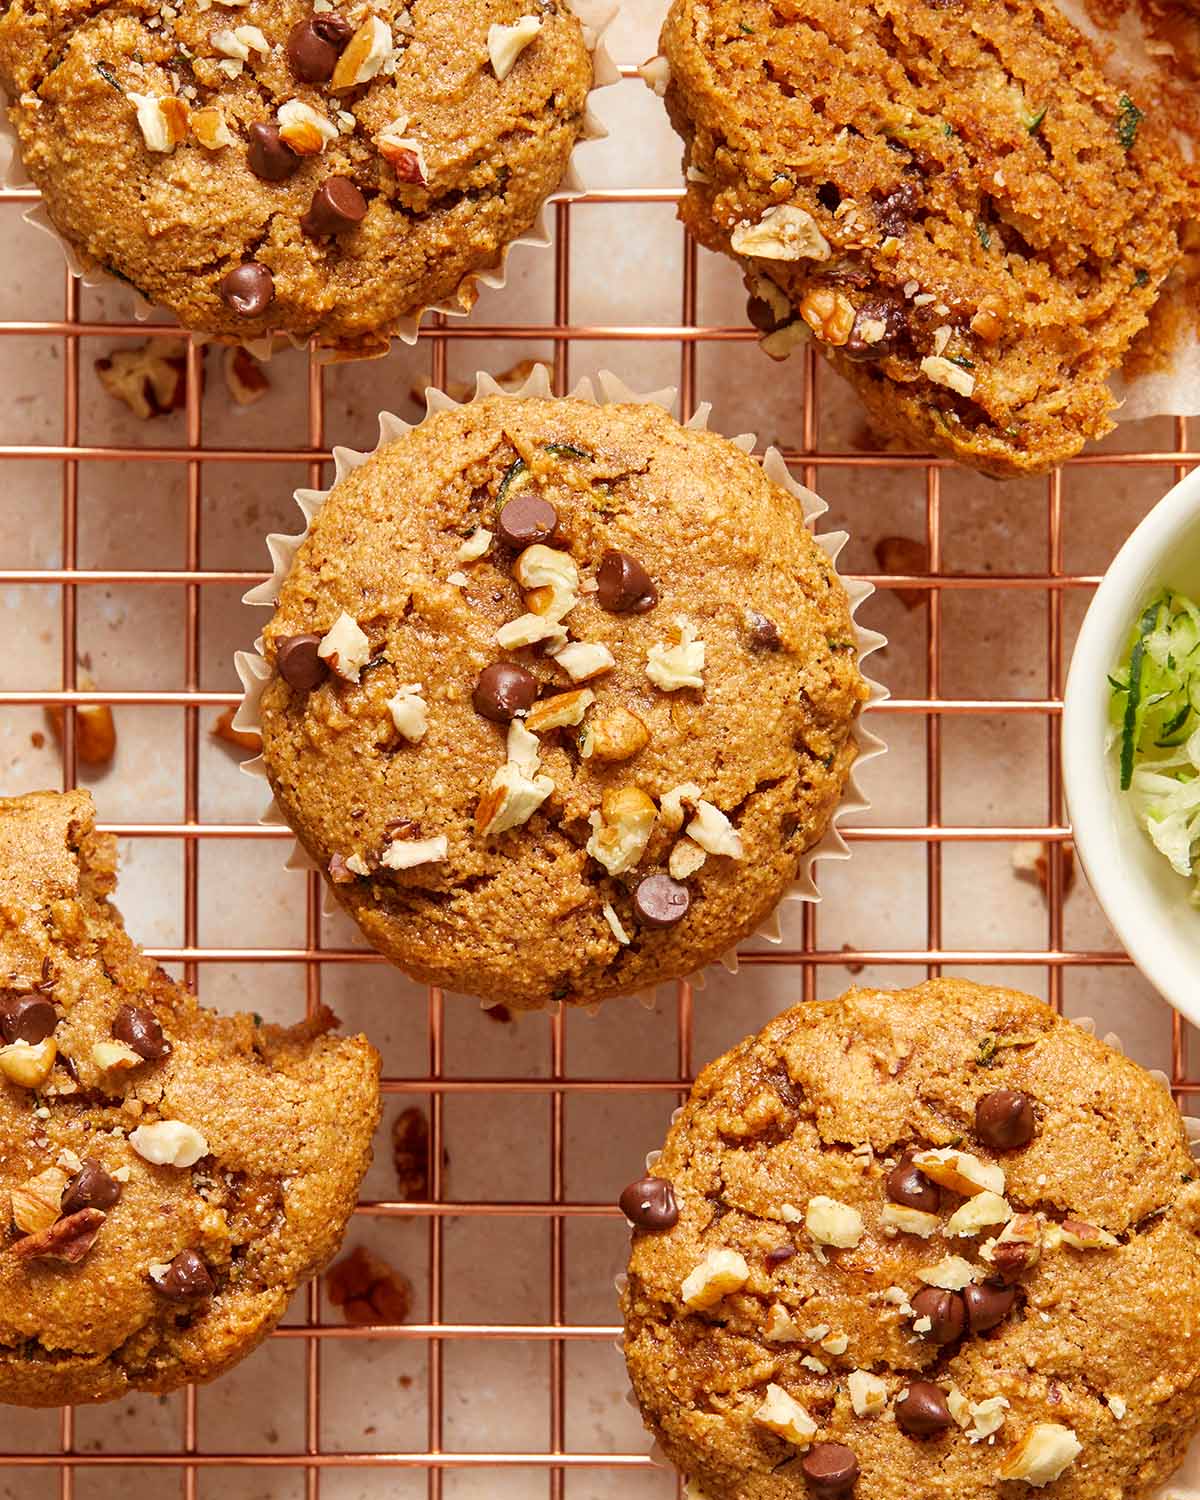 Zucchini muffins topped with chocolate chips and pecans and cooling on a wire rack.